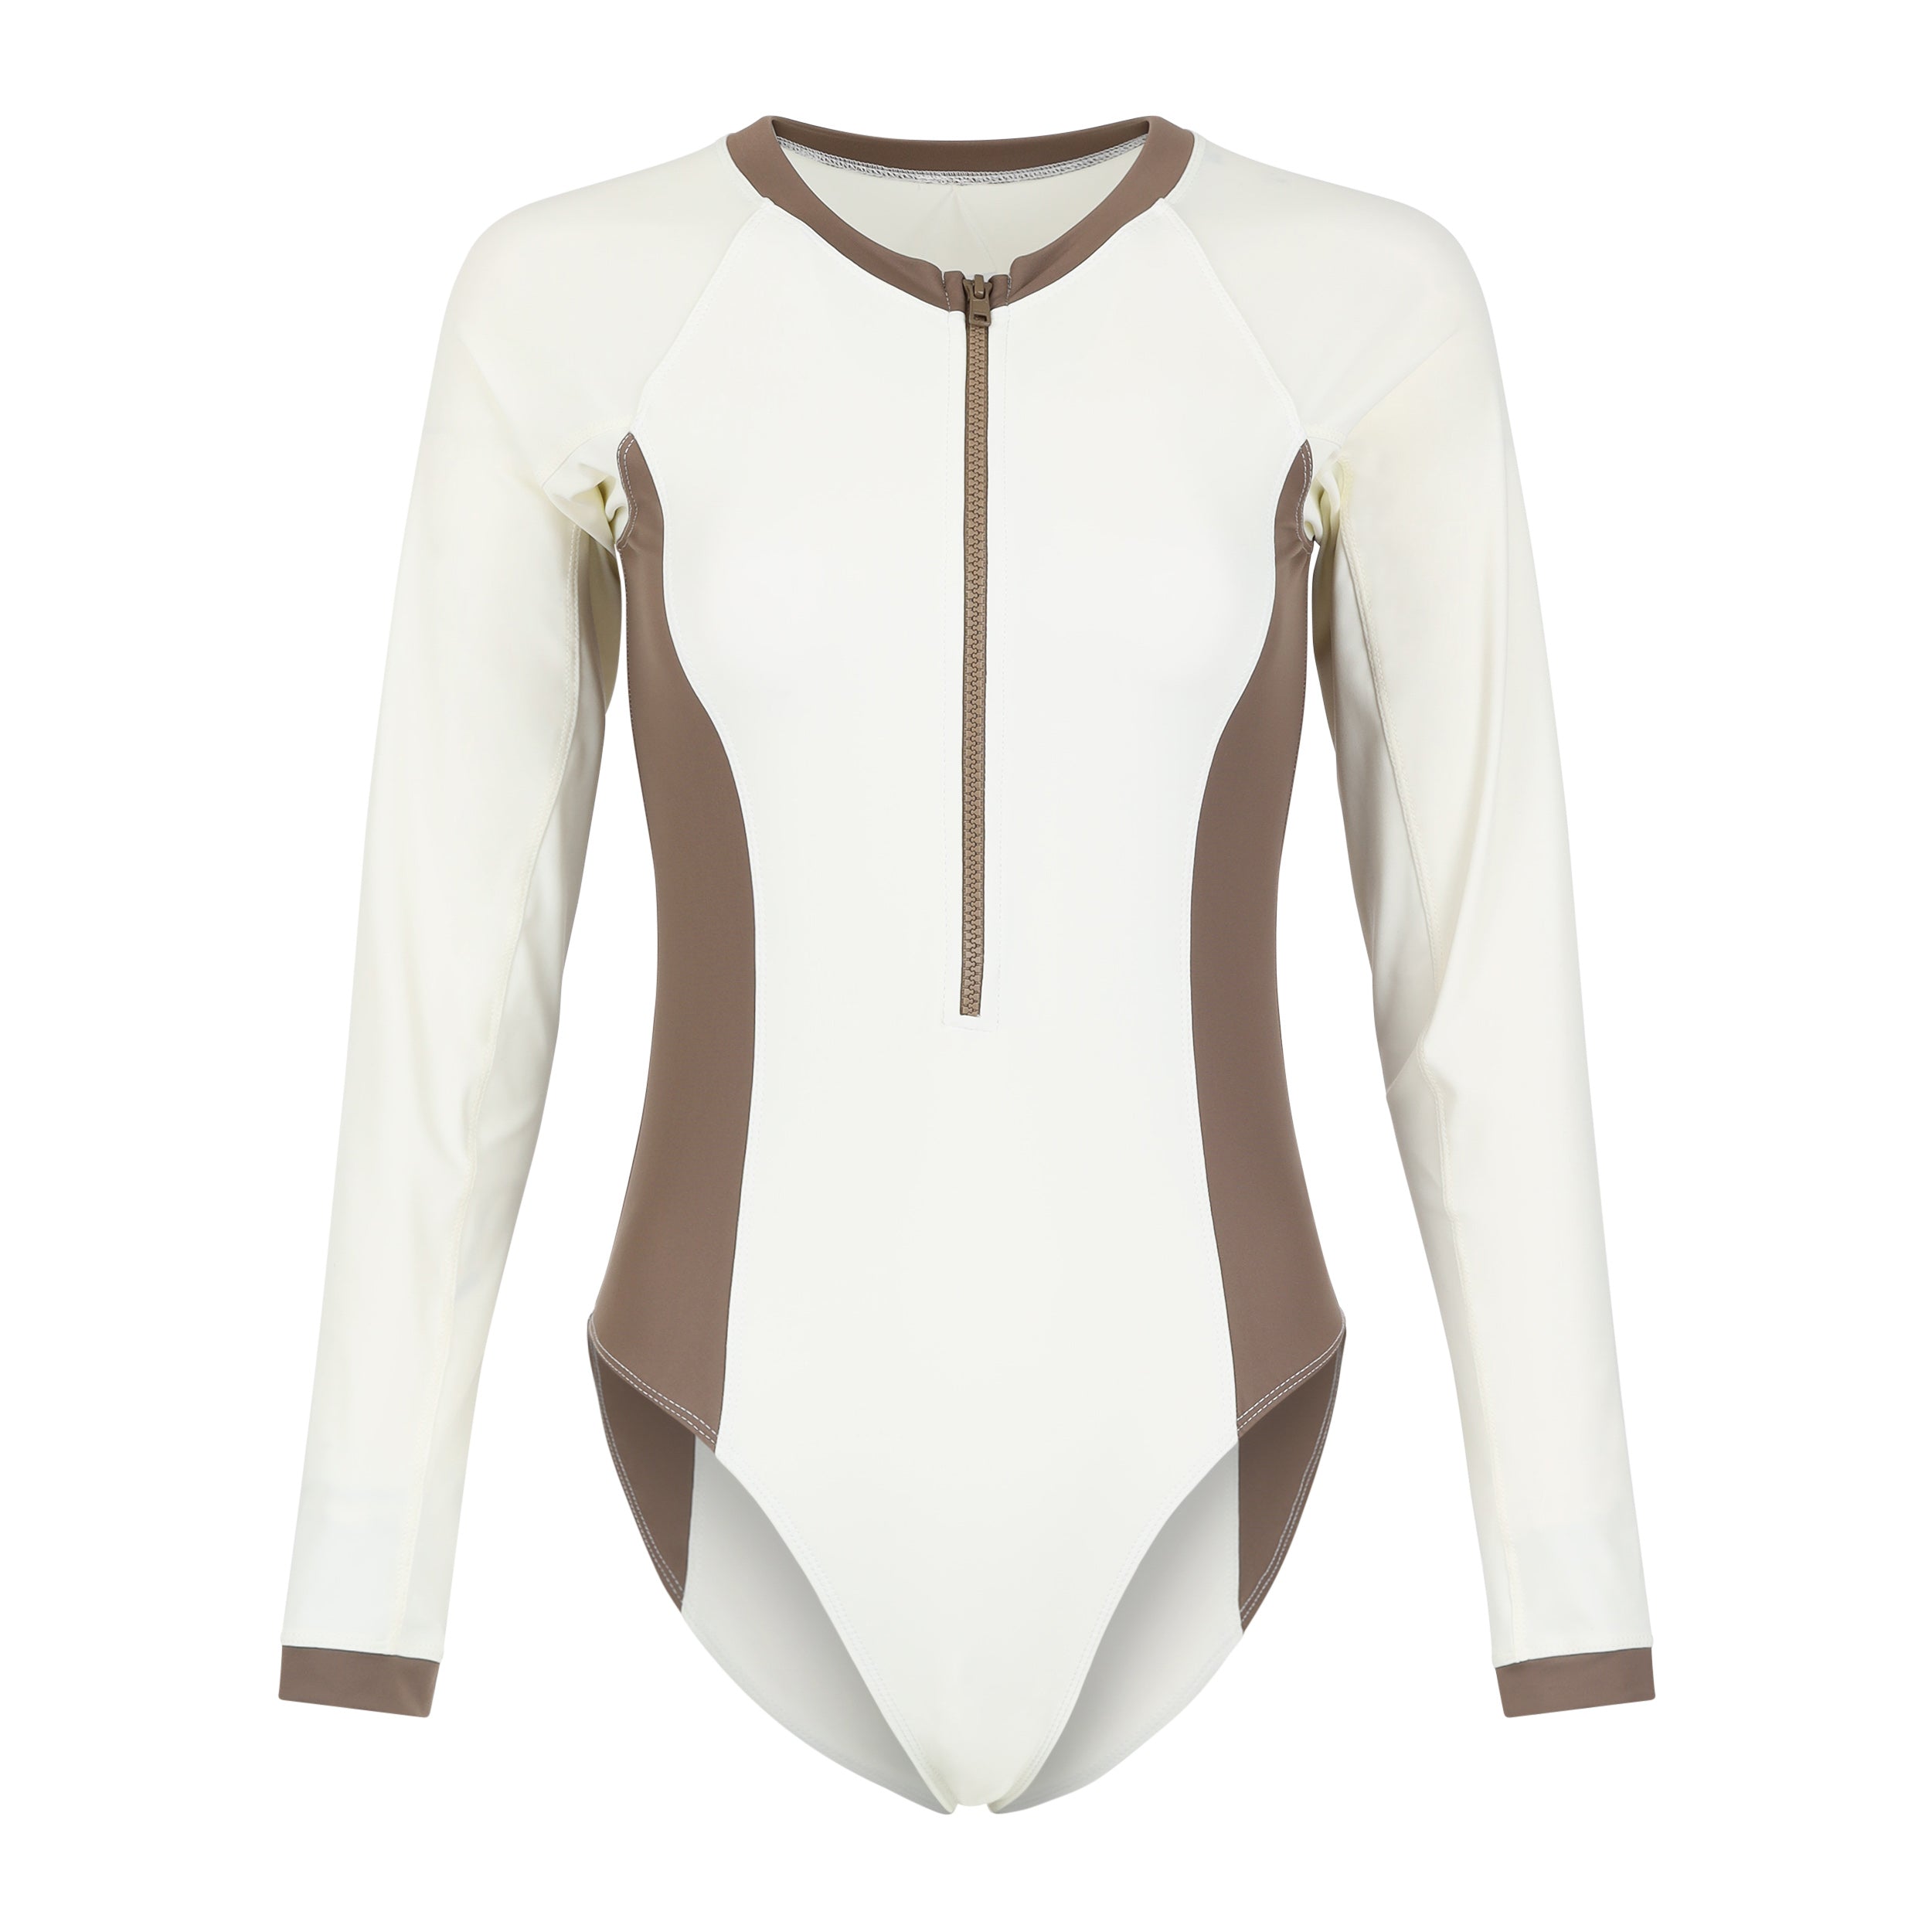 Cardiff Surf Suit - Pearl